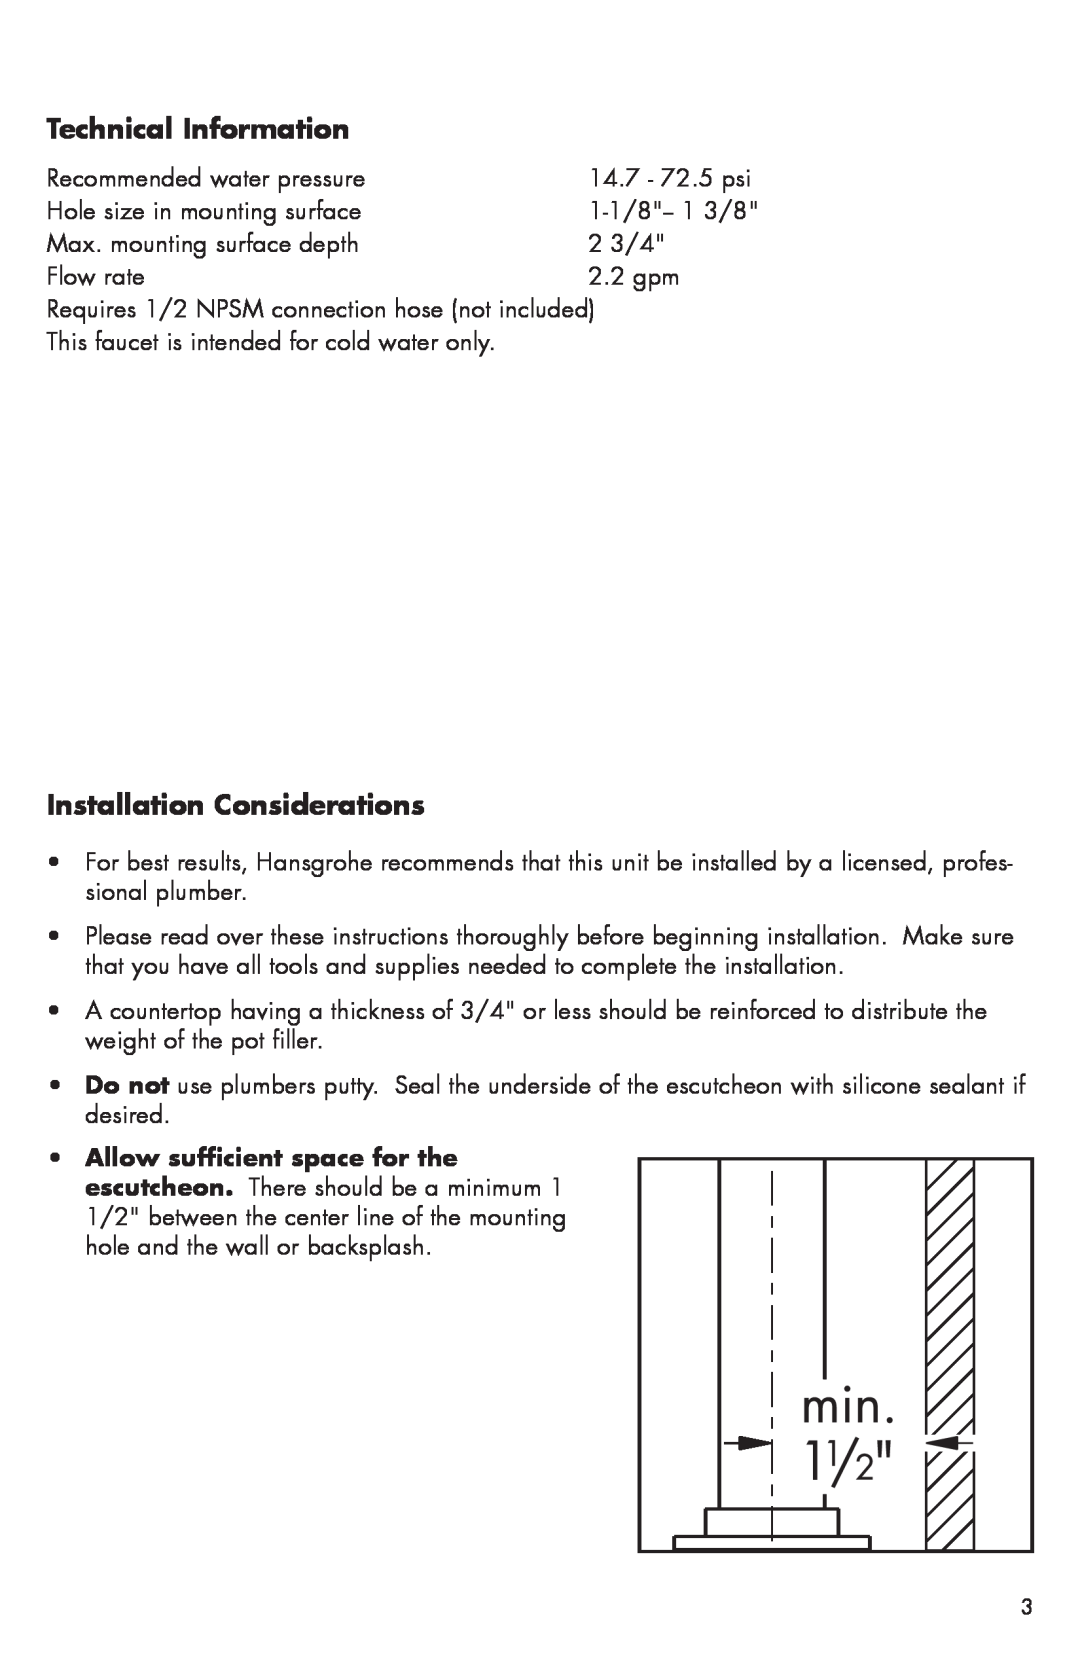 Hans Grohe 04058XX0, 04060XX0 installation instructions Technical Information, Installation Considerations 